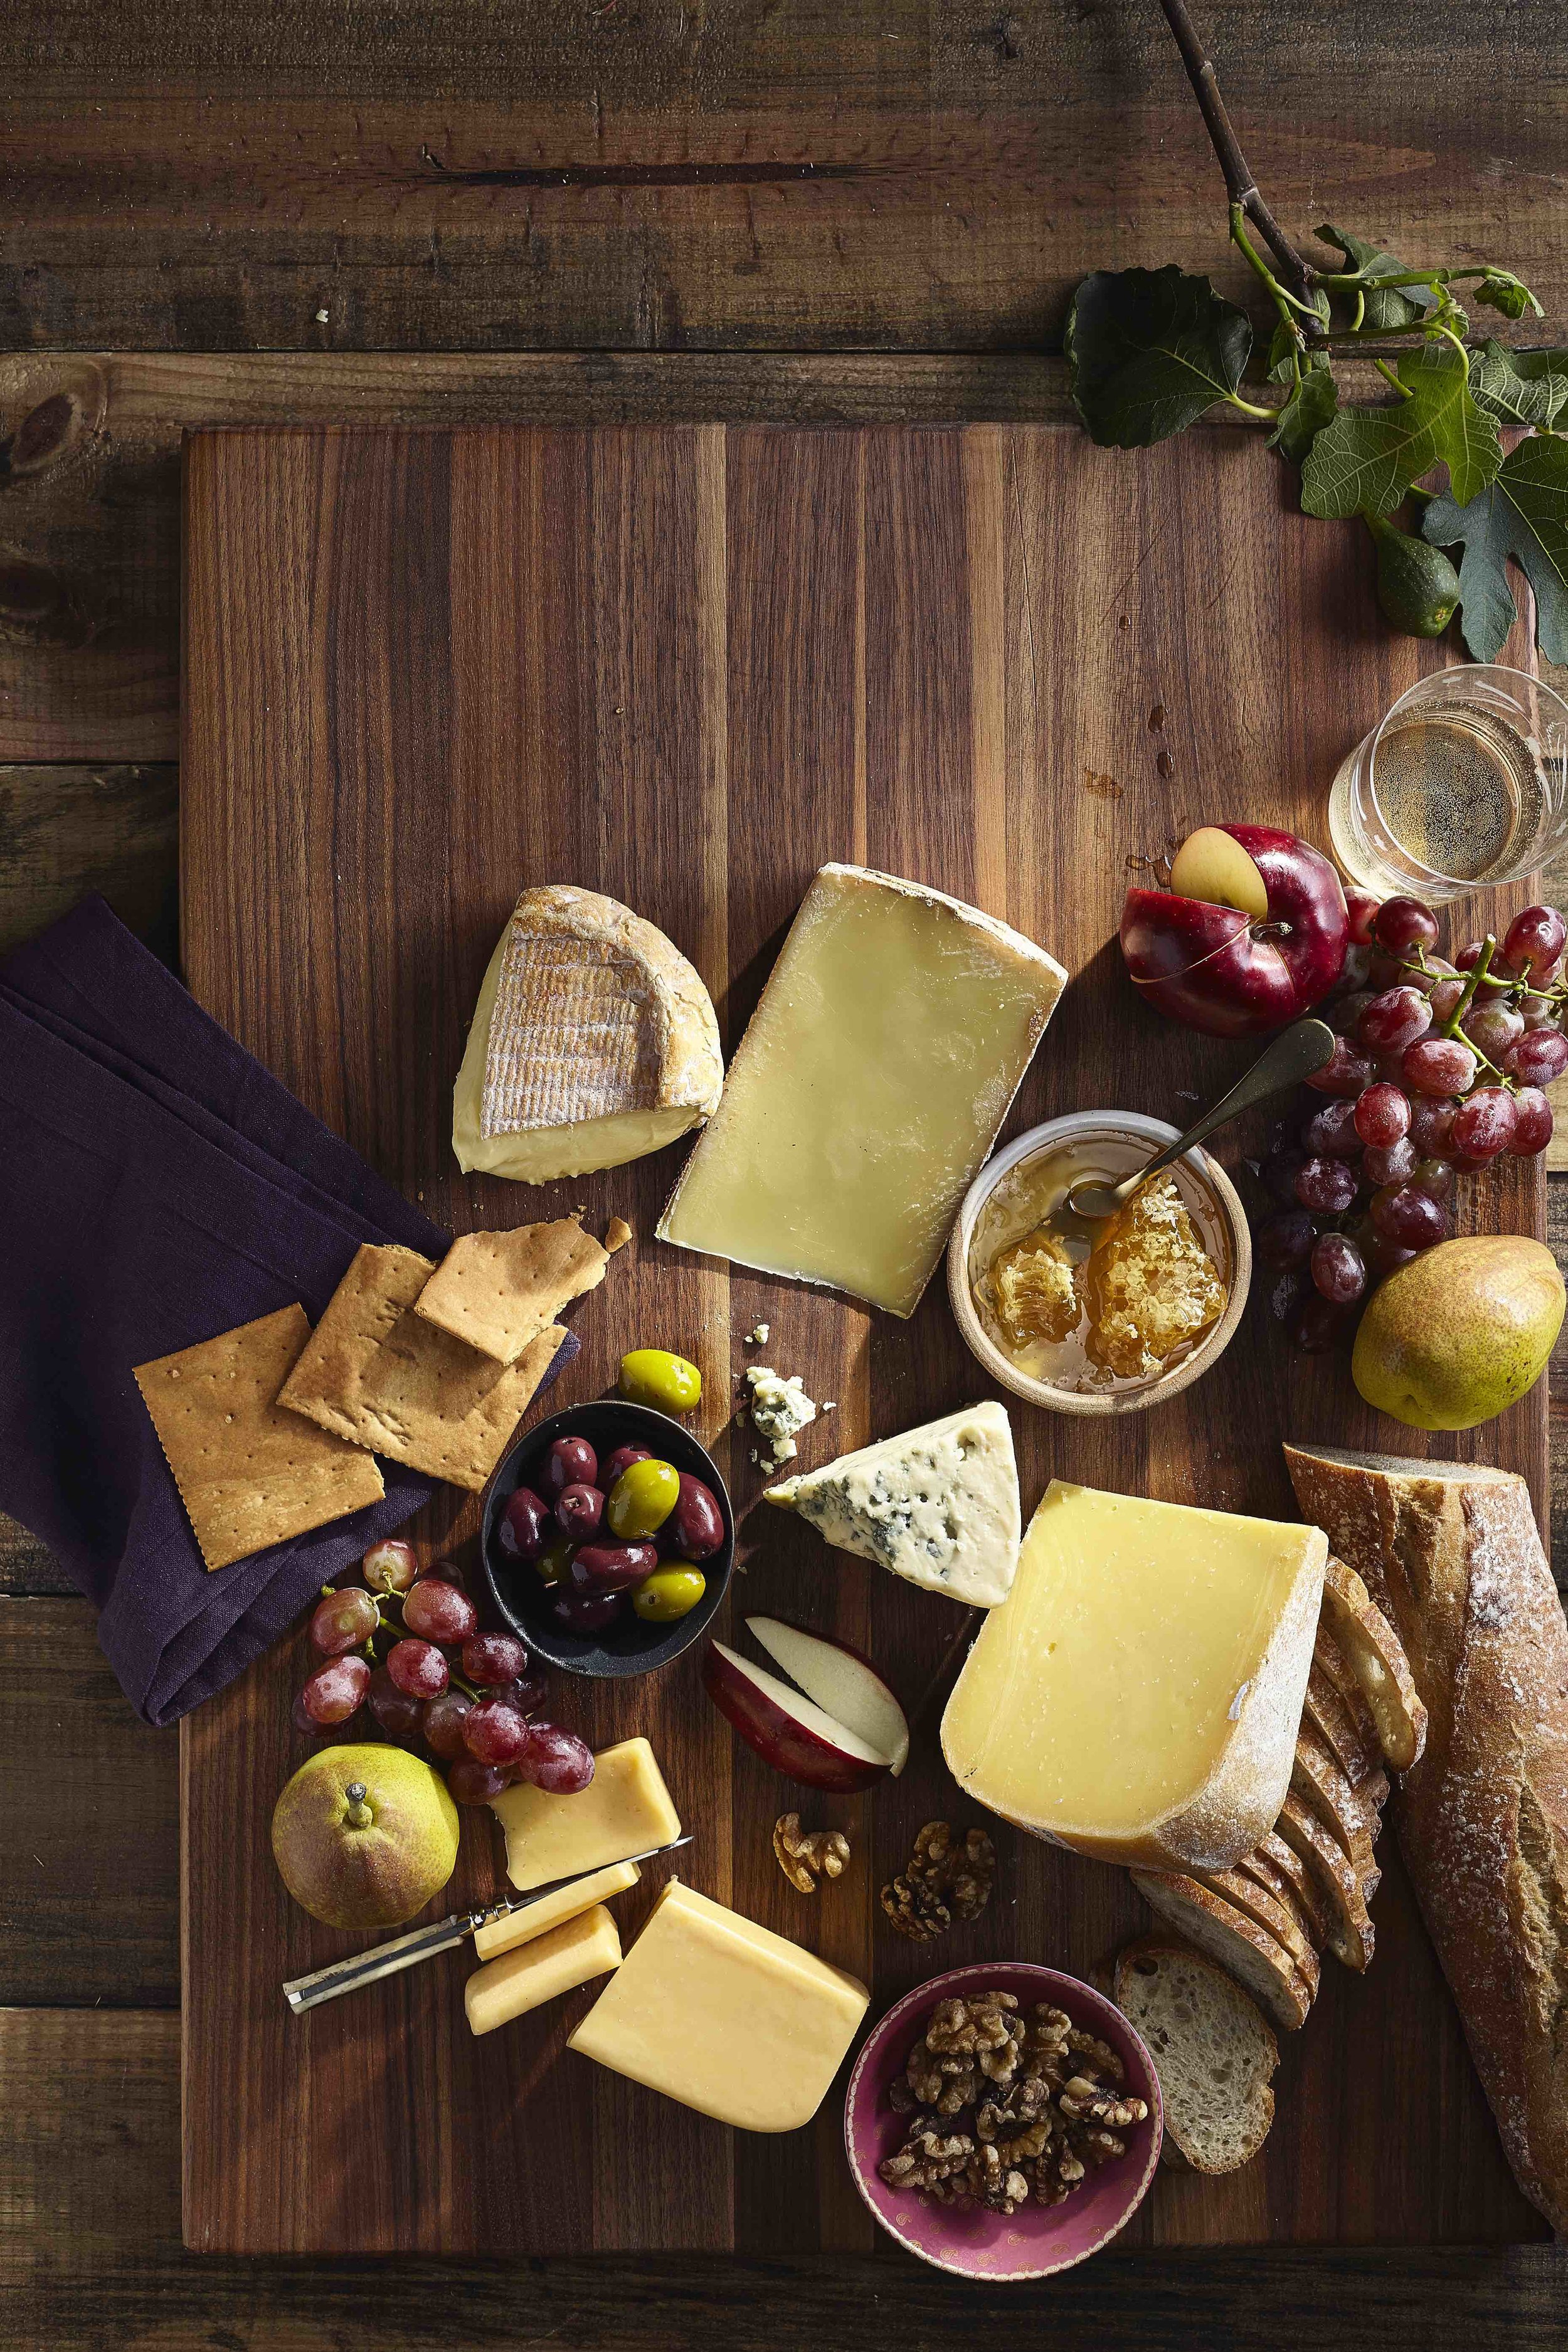 Fall_Harvest_Specialty_Cheese_OG_Studer_Organic_Cheeses.jpg